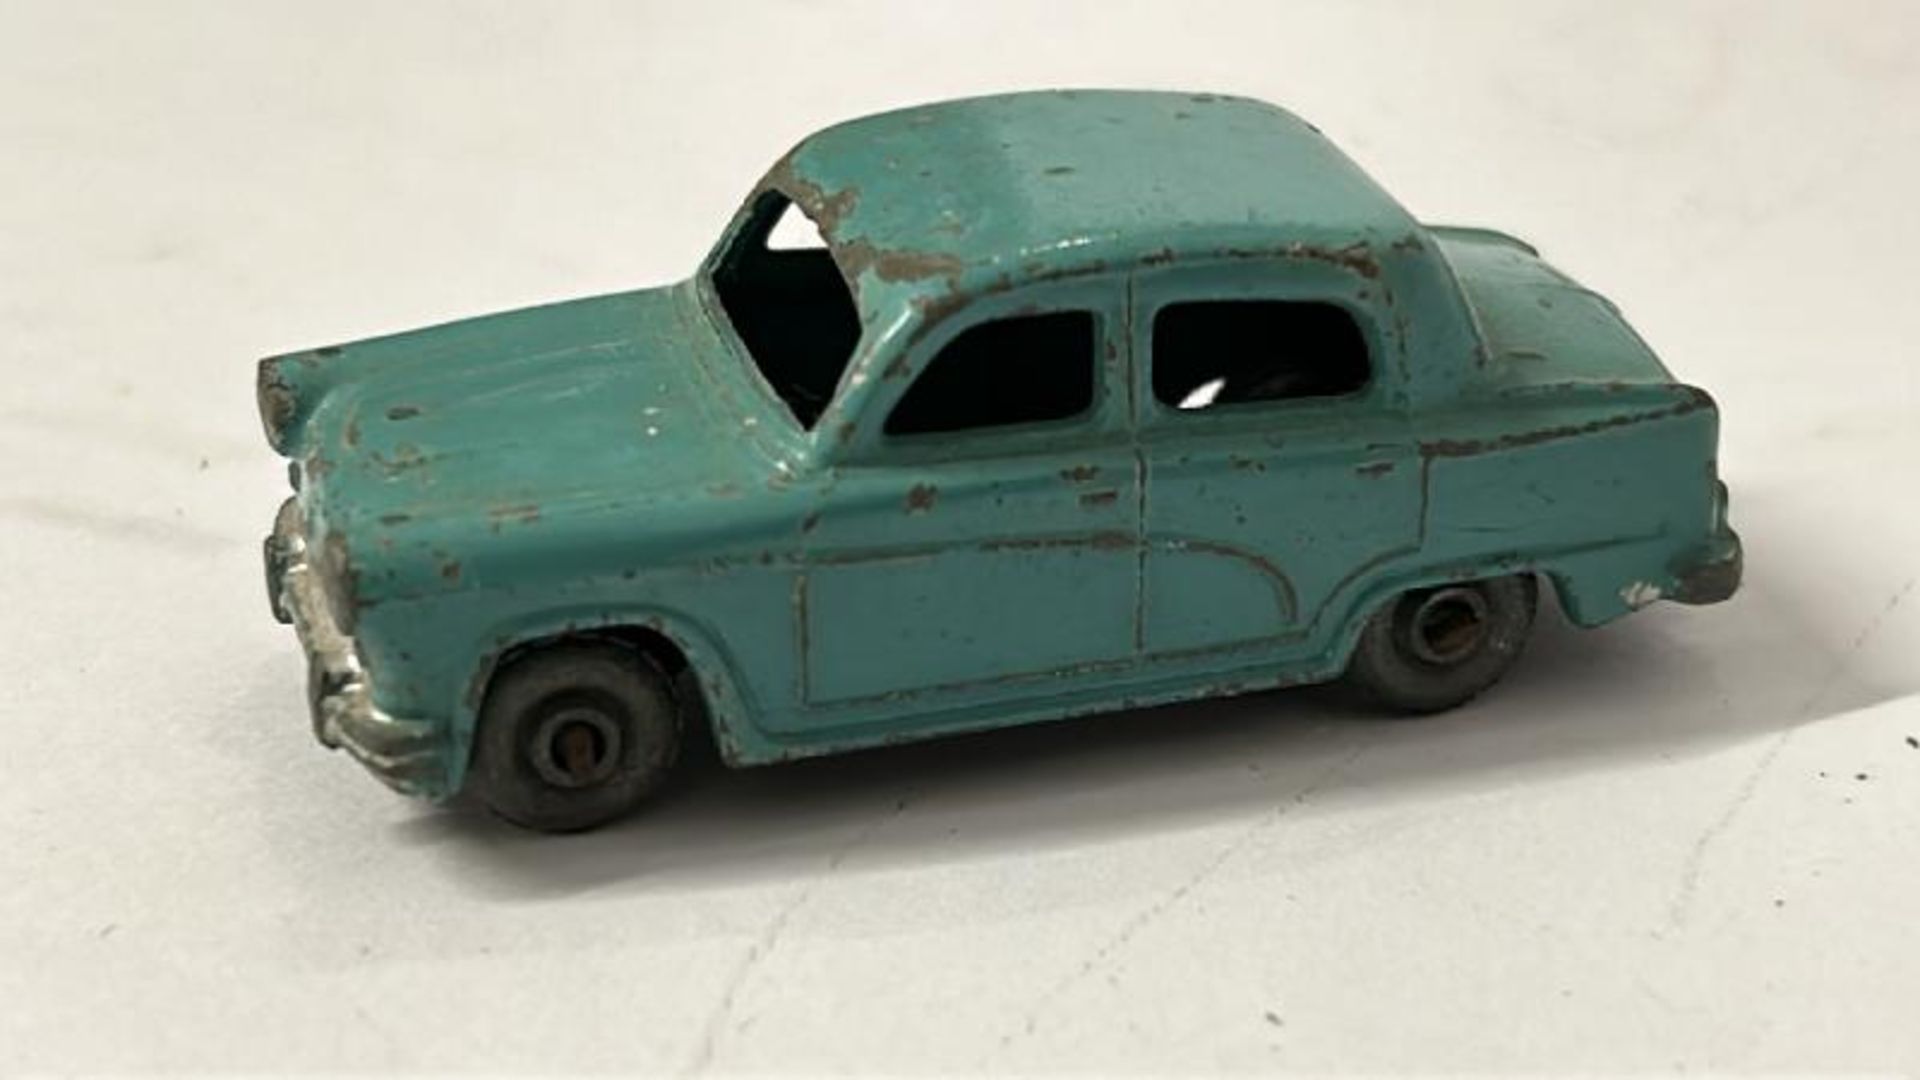 Unboxed Matchbox group including Ford Zodiac no.39, Chevrolet Impala no.57 and Ford Corsair no.45 ( - Image 12 of 25